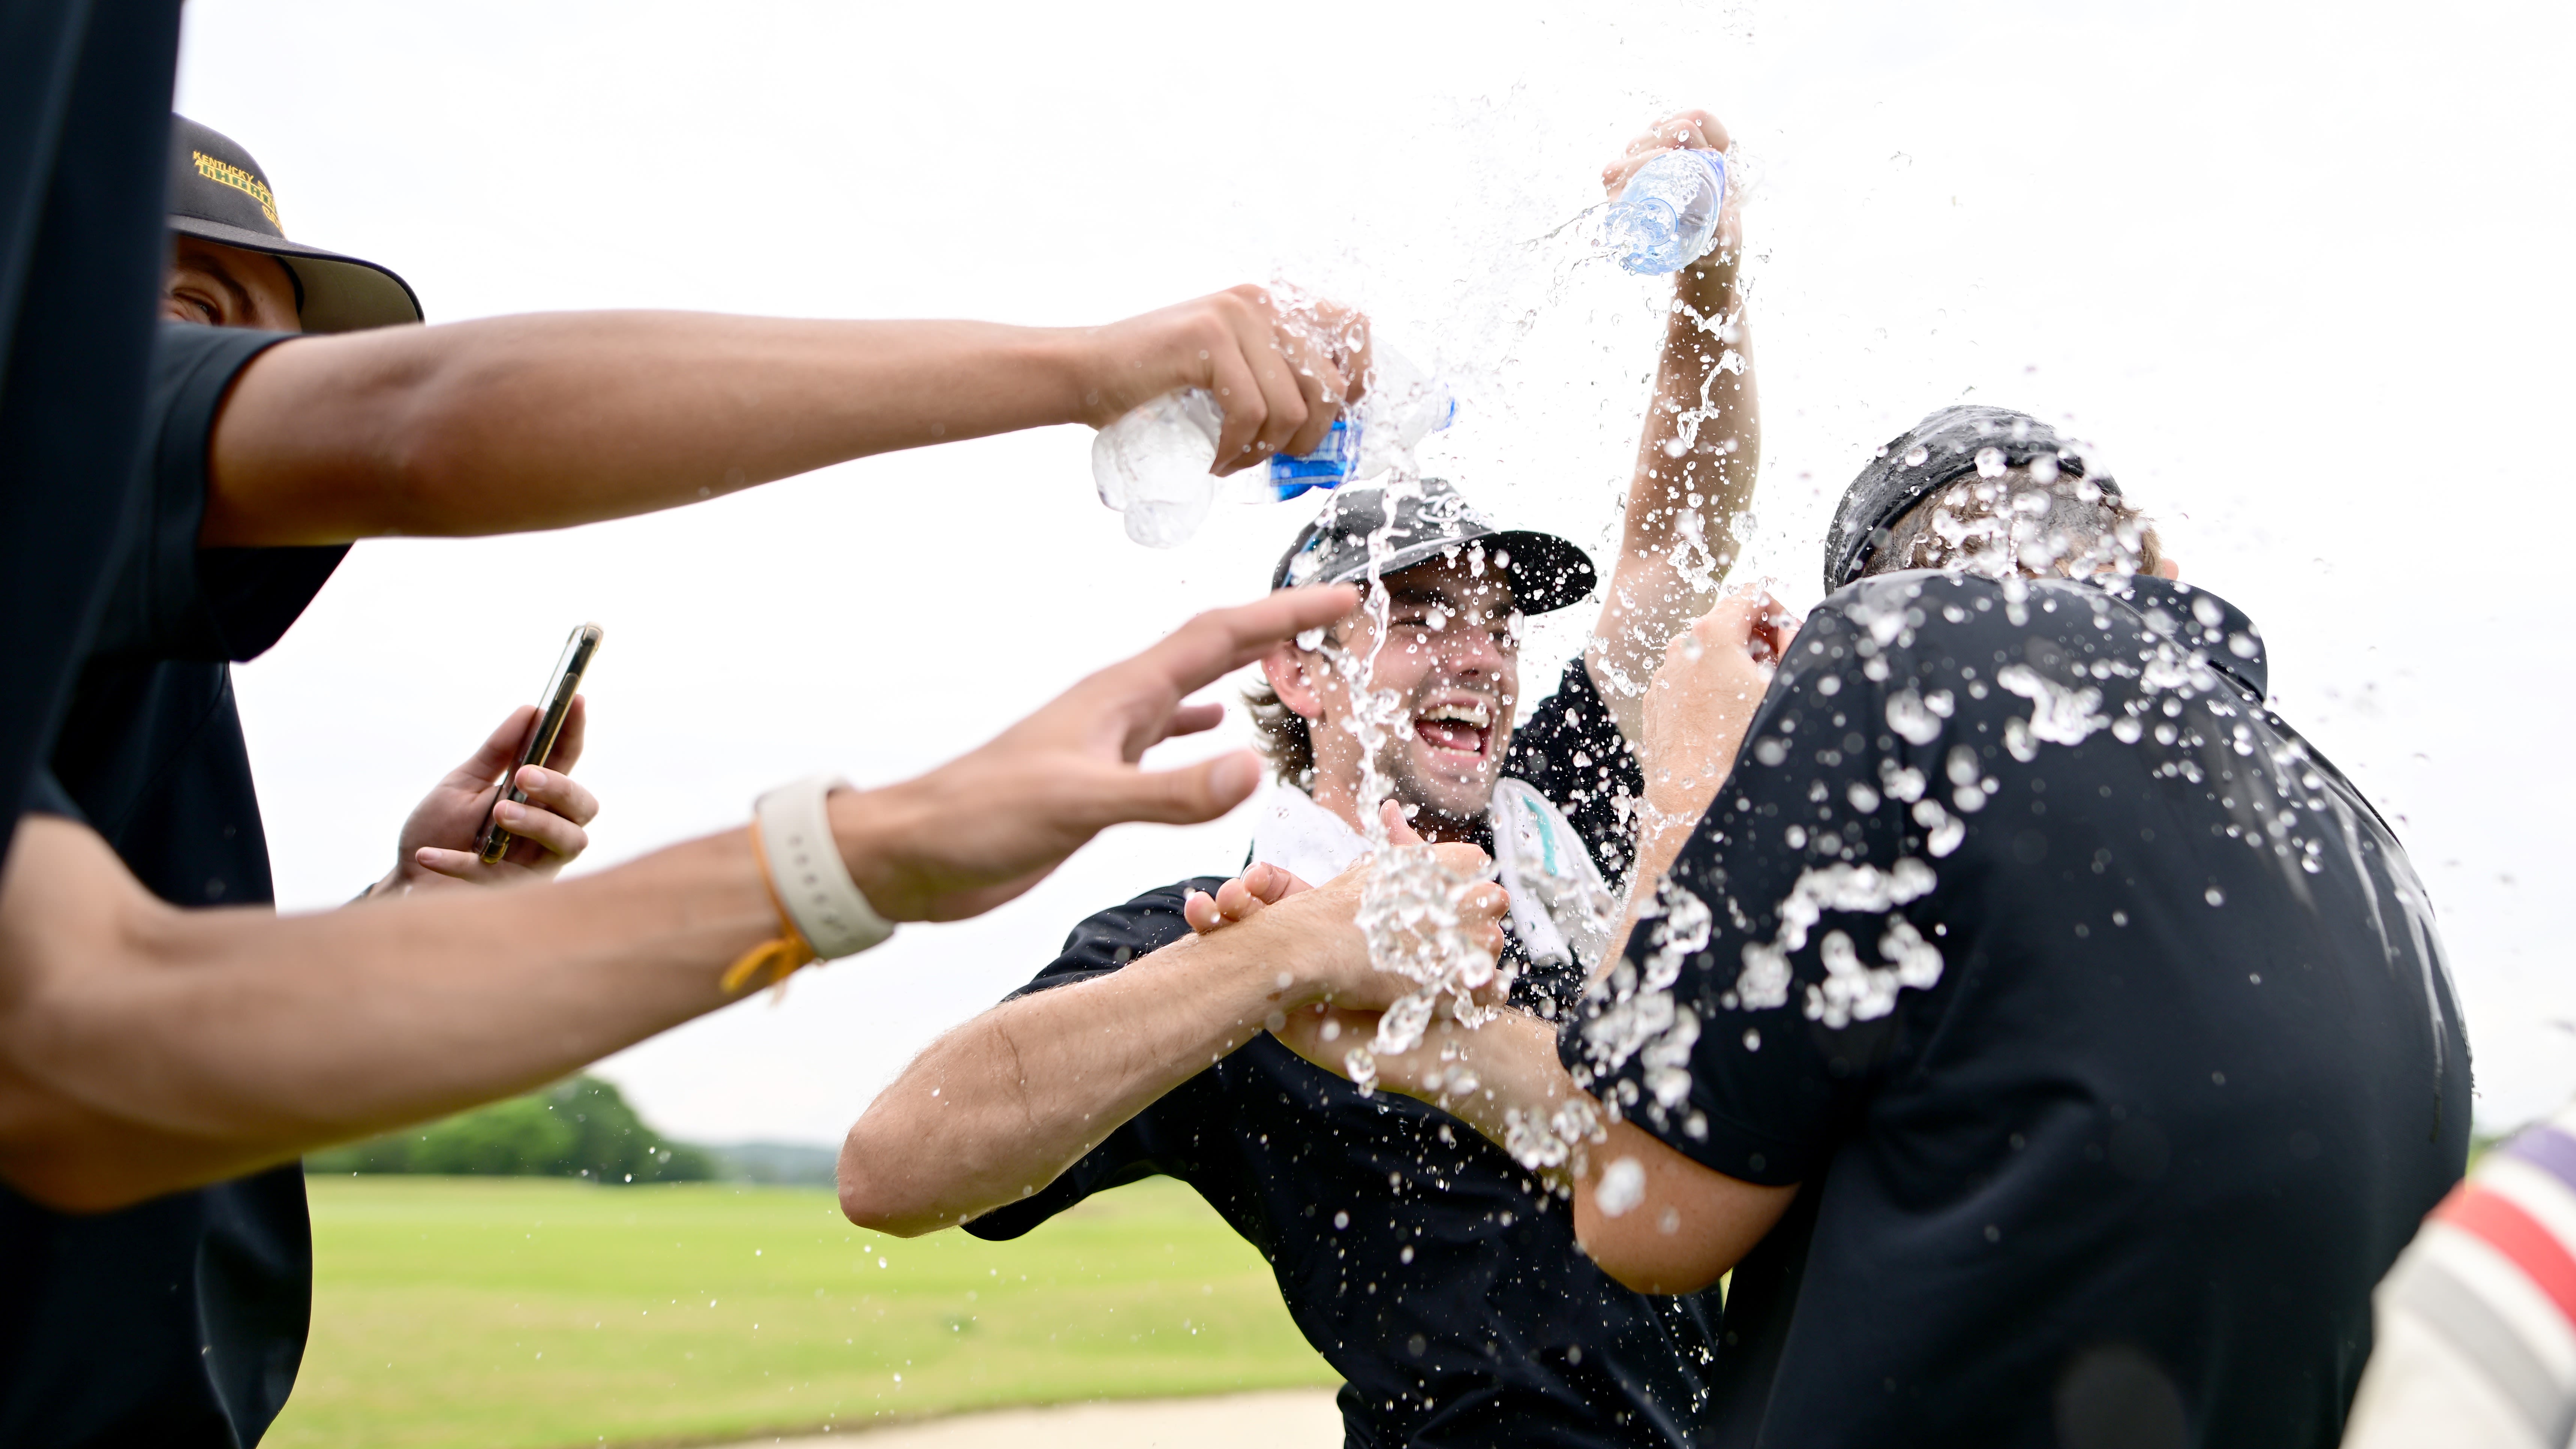 Participants of Kentucky State University dump water on Micah Stangebye during the final round of the 2023 PGA WORKS Collegiate Championship.